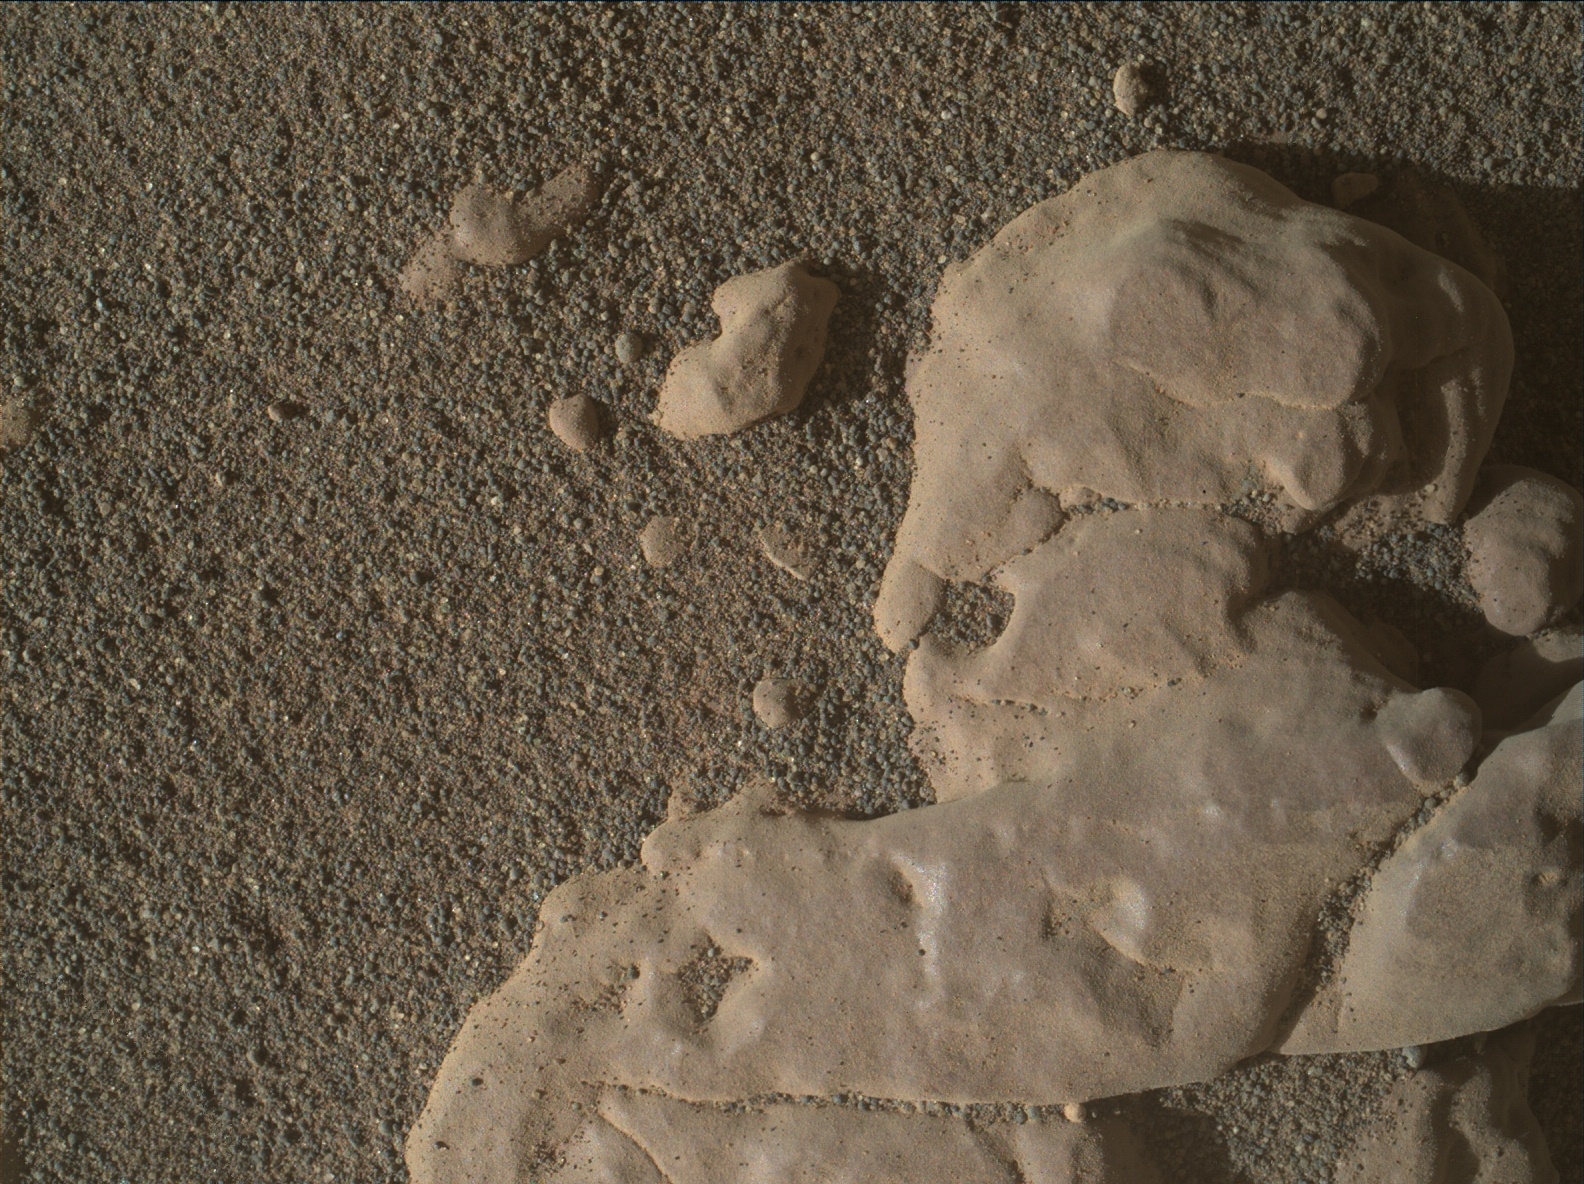 Nasa's Mars rover Curiosity acquired this image using its Mars Hand Lens Imager (MAHLI) on Sol 2595